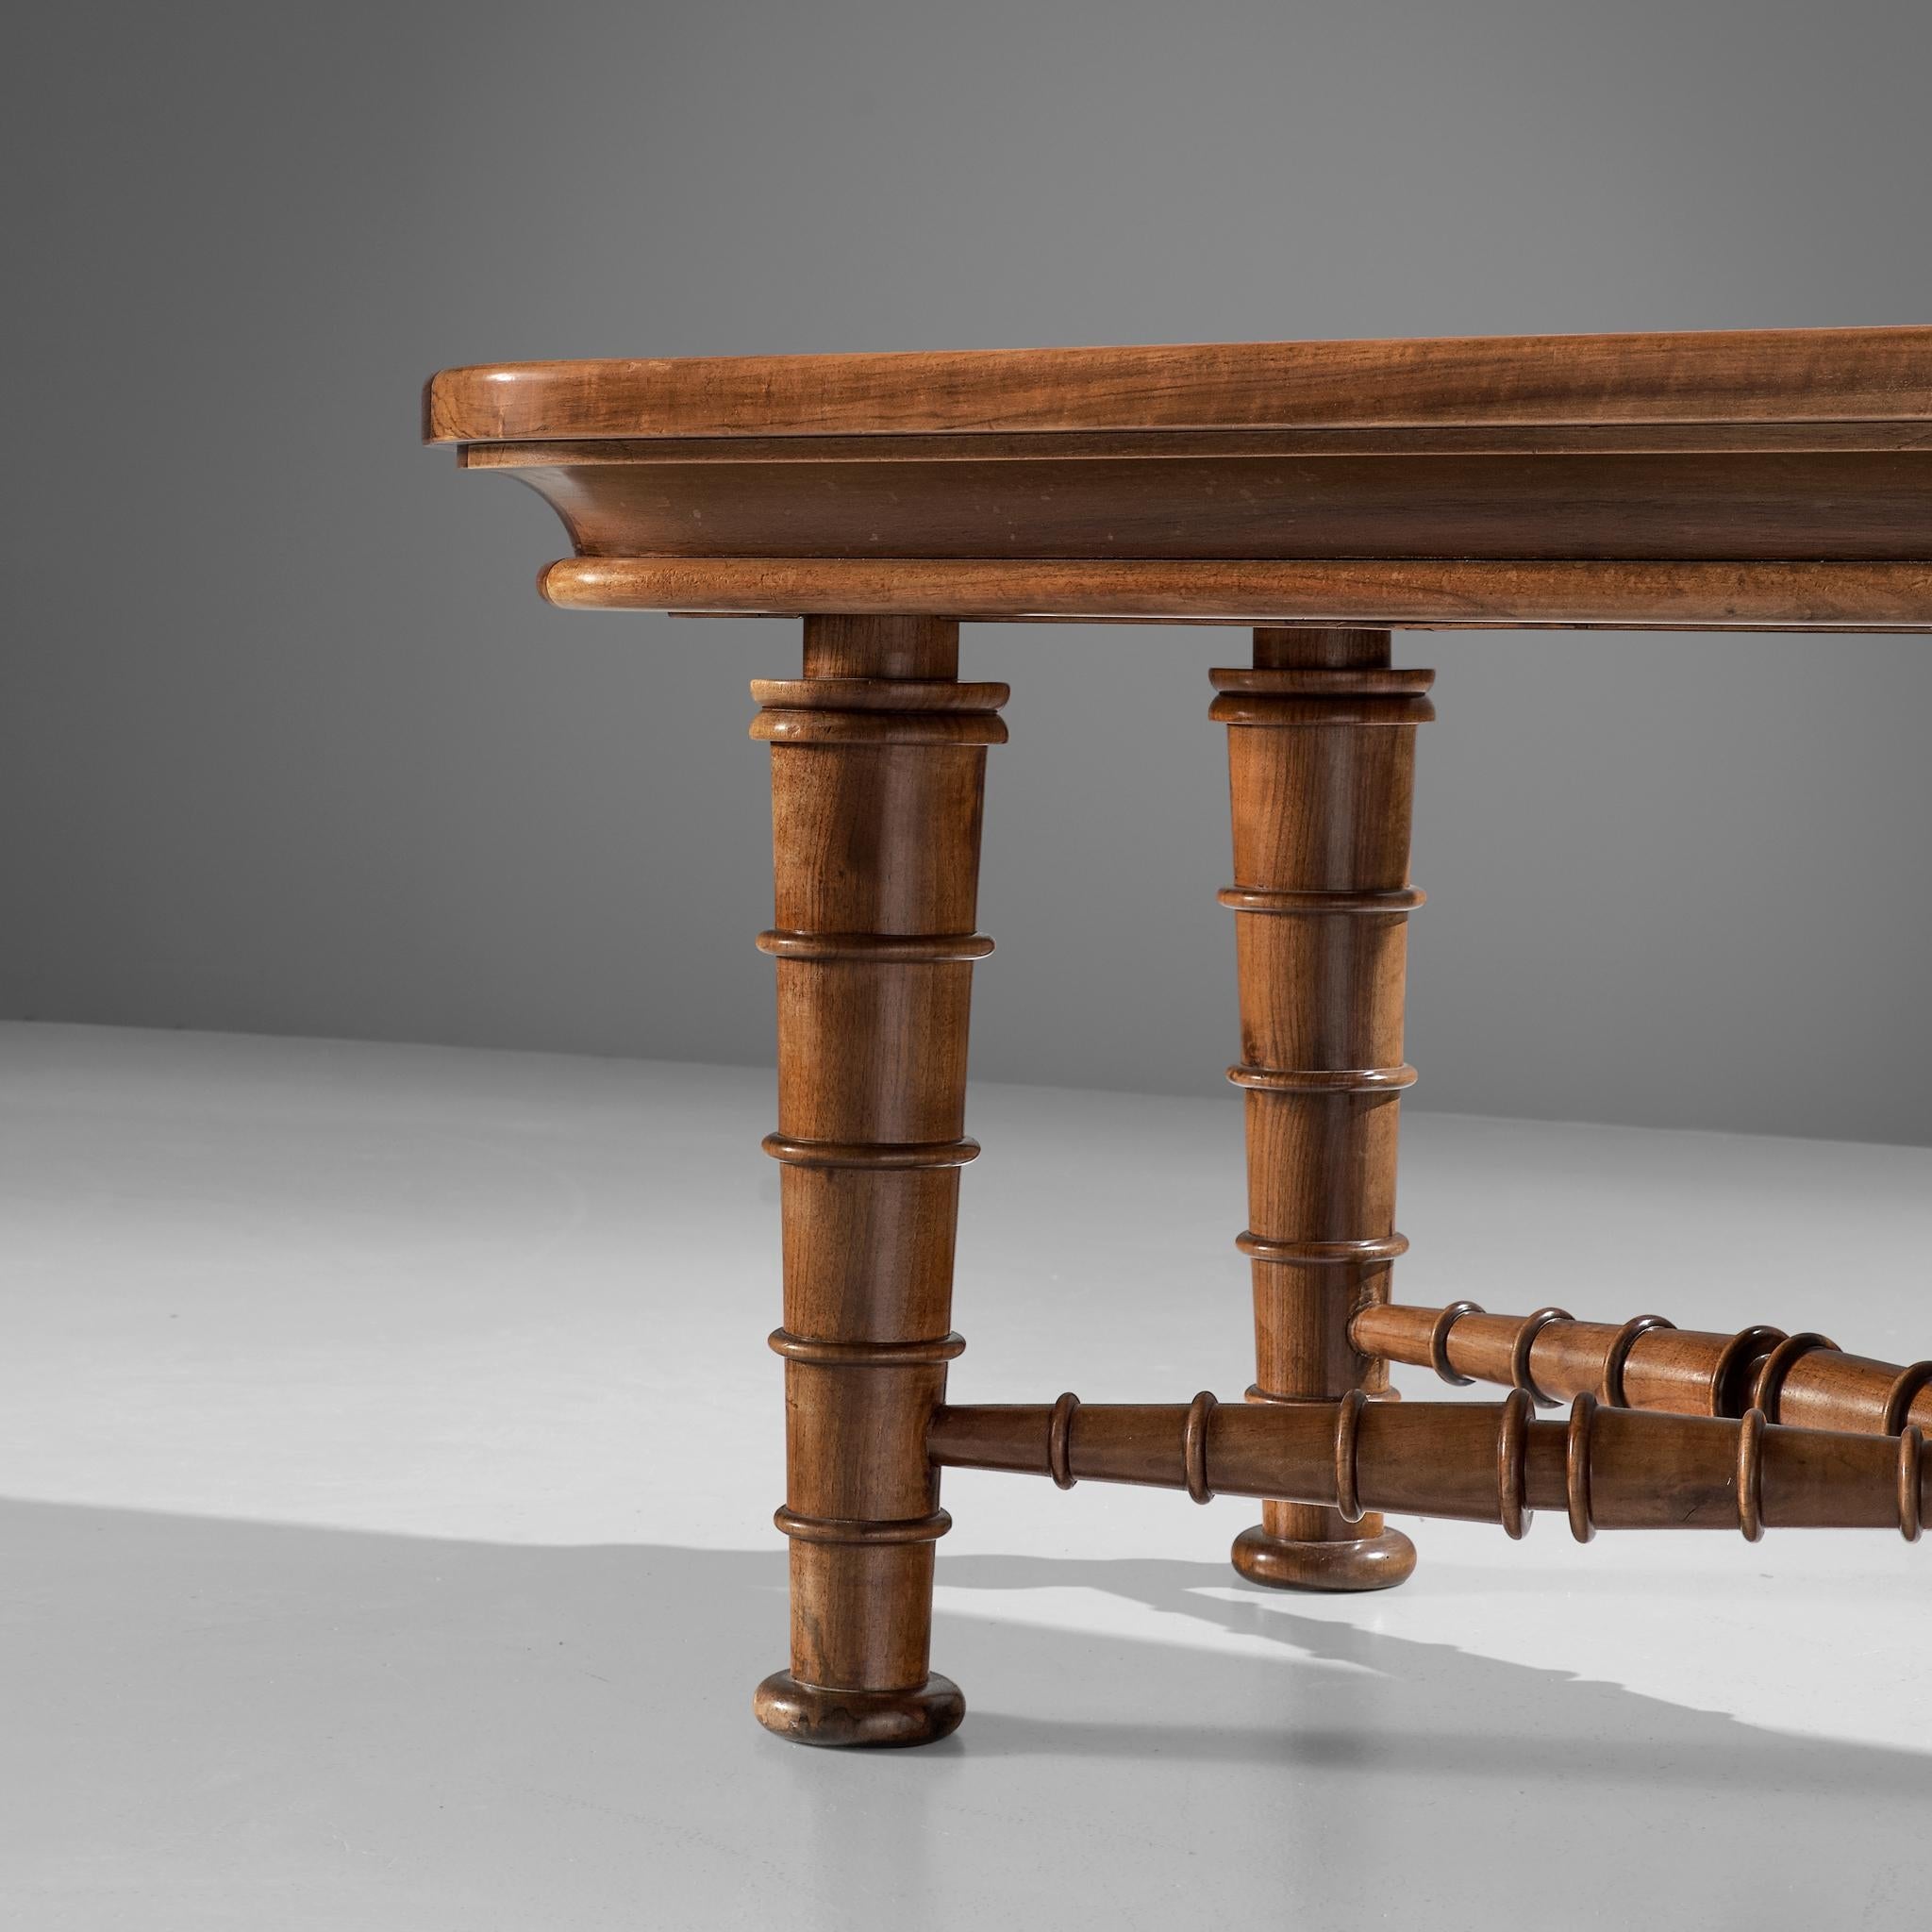 Italian Art Deco Dining Table in Walnut with Sculptural Base